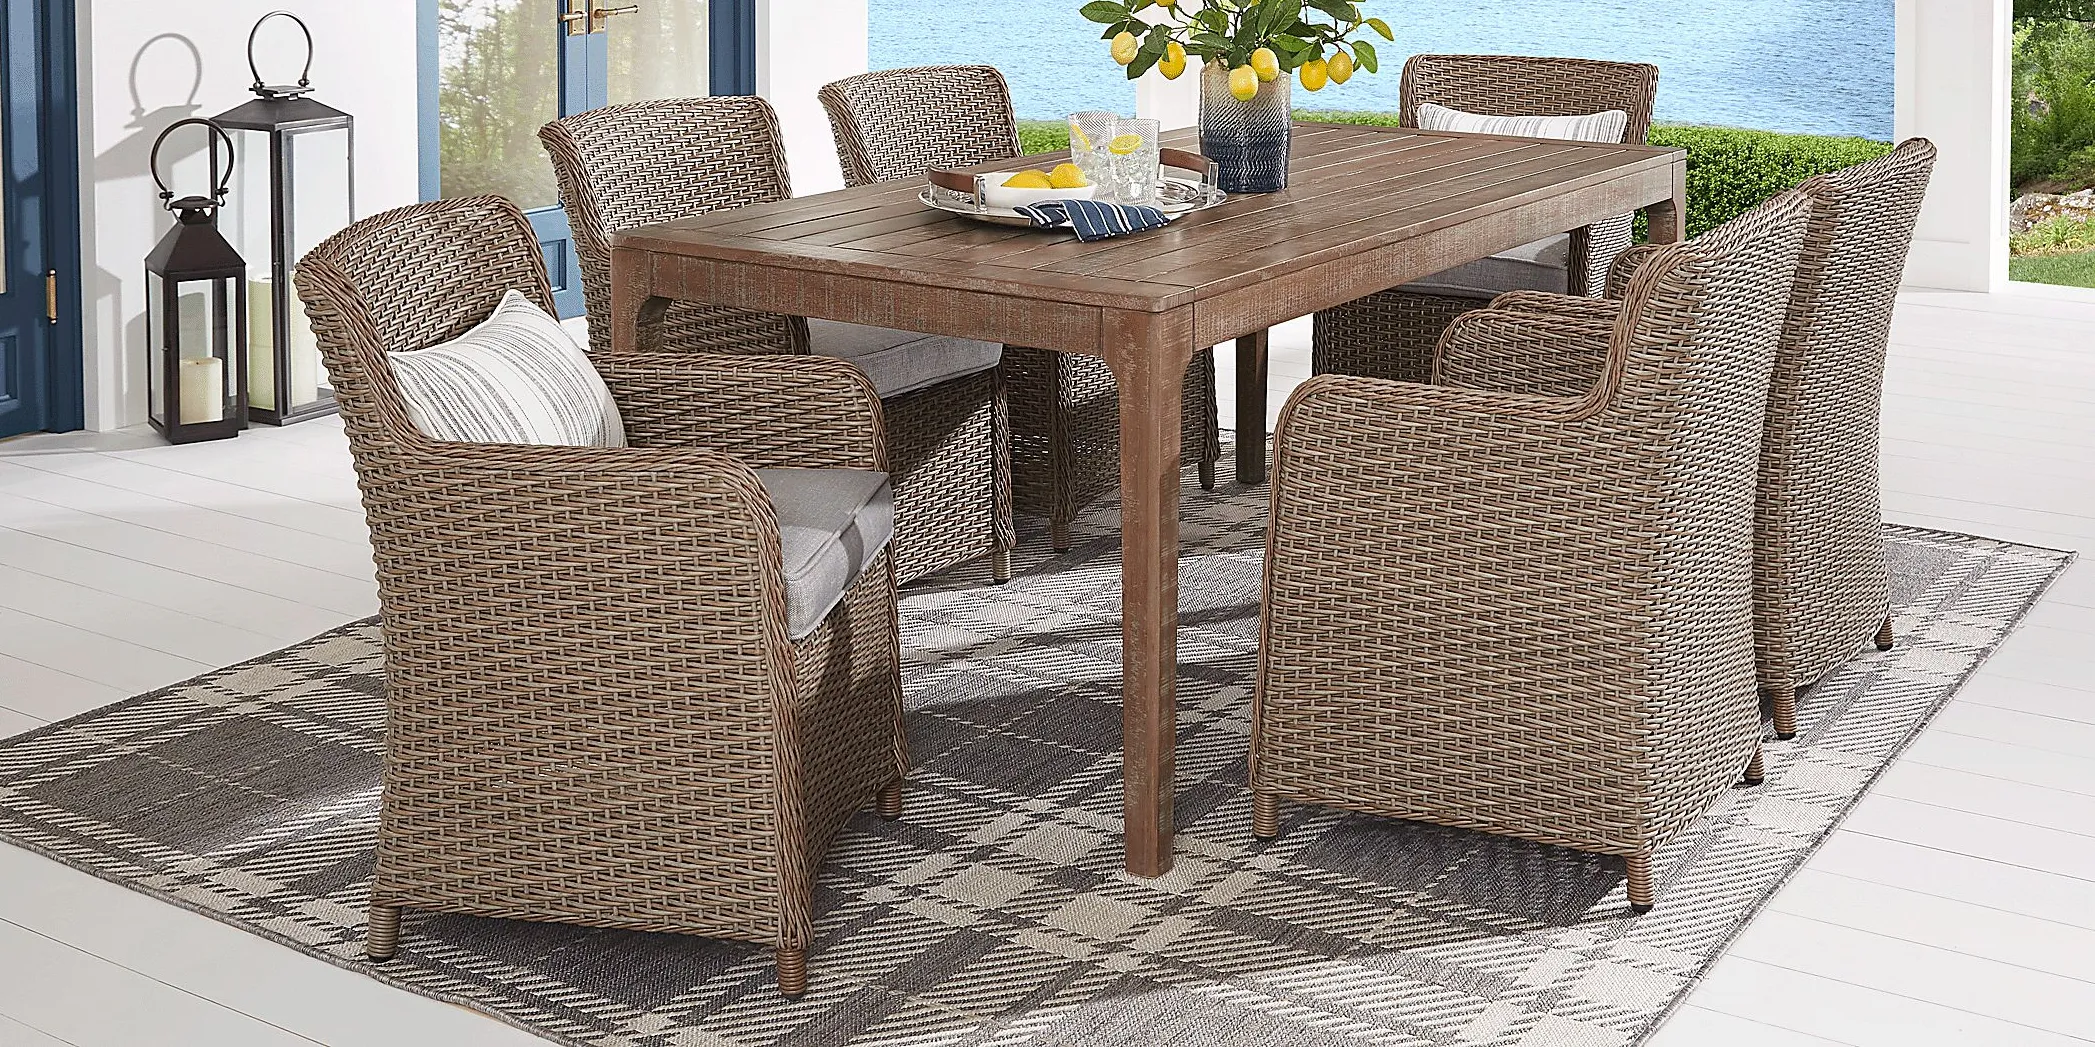 Ridgecrest Natural 7 Pc Rectangle Outdoor Dining Set With Slate Cushions